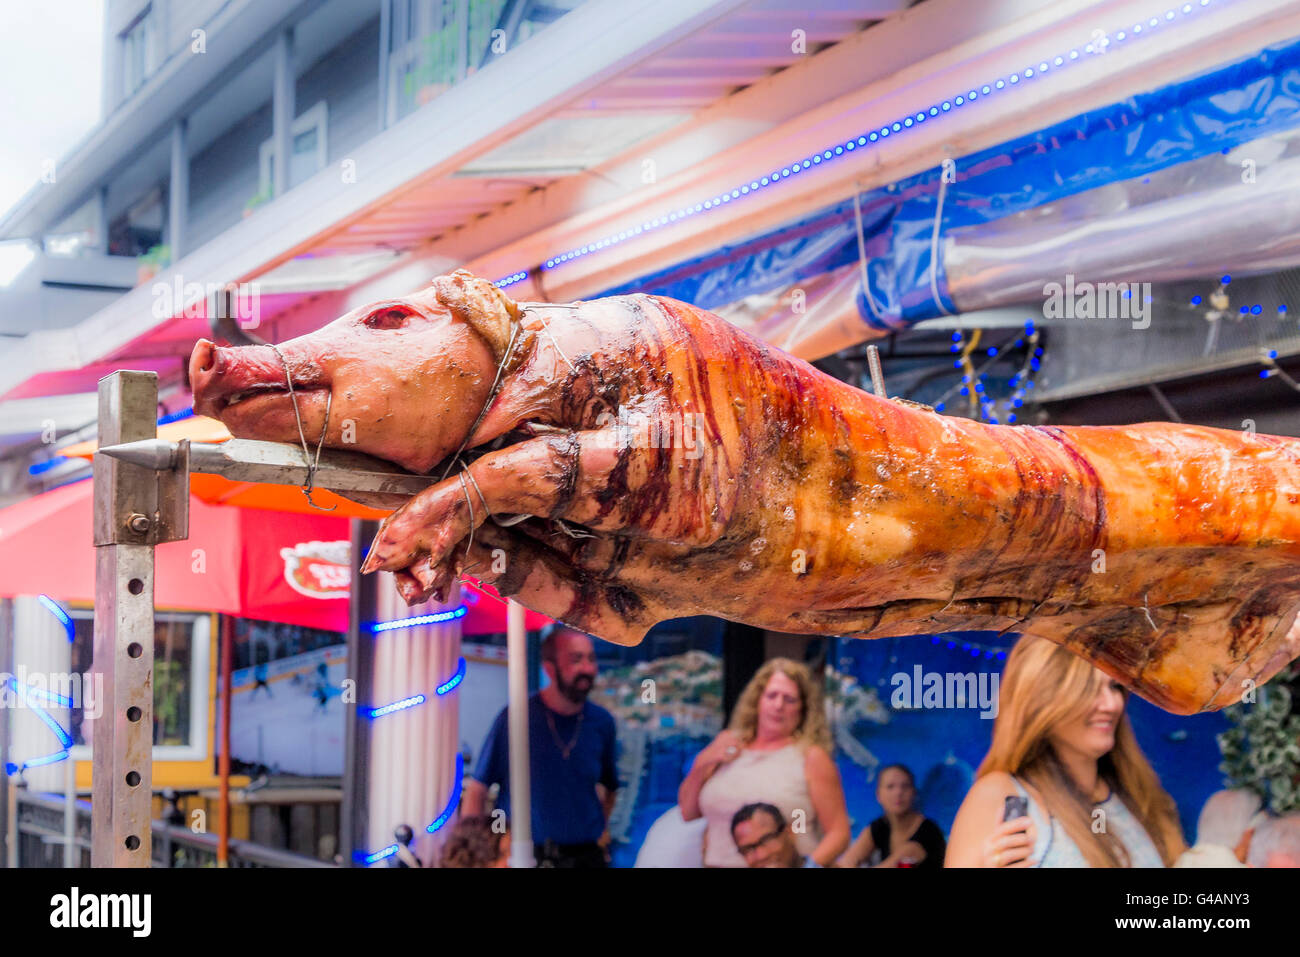 Roasting pig on a spit. talian Day, Commercial Drive, Vancouver, British Columbia, Canada Stock Photo